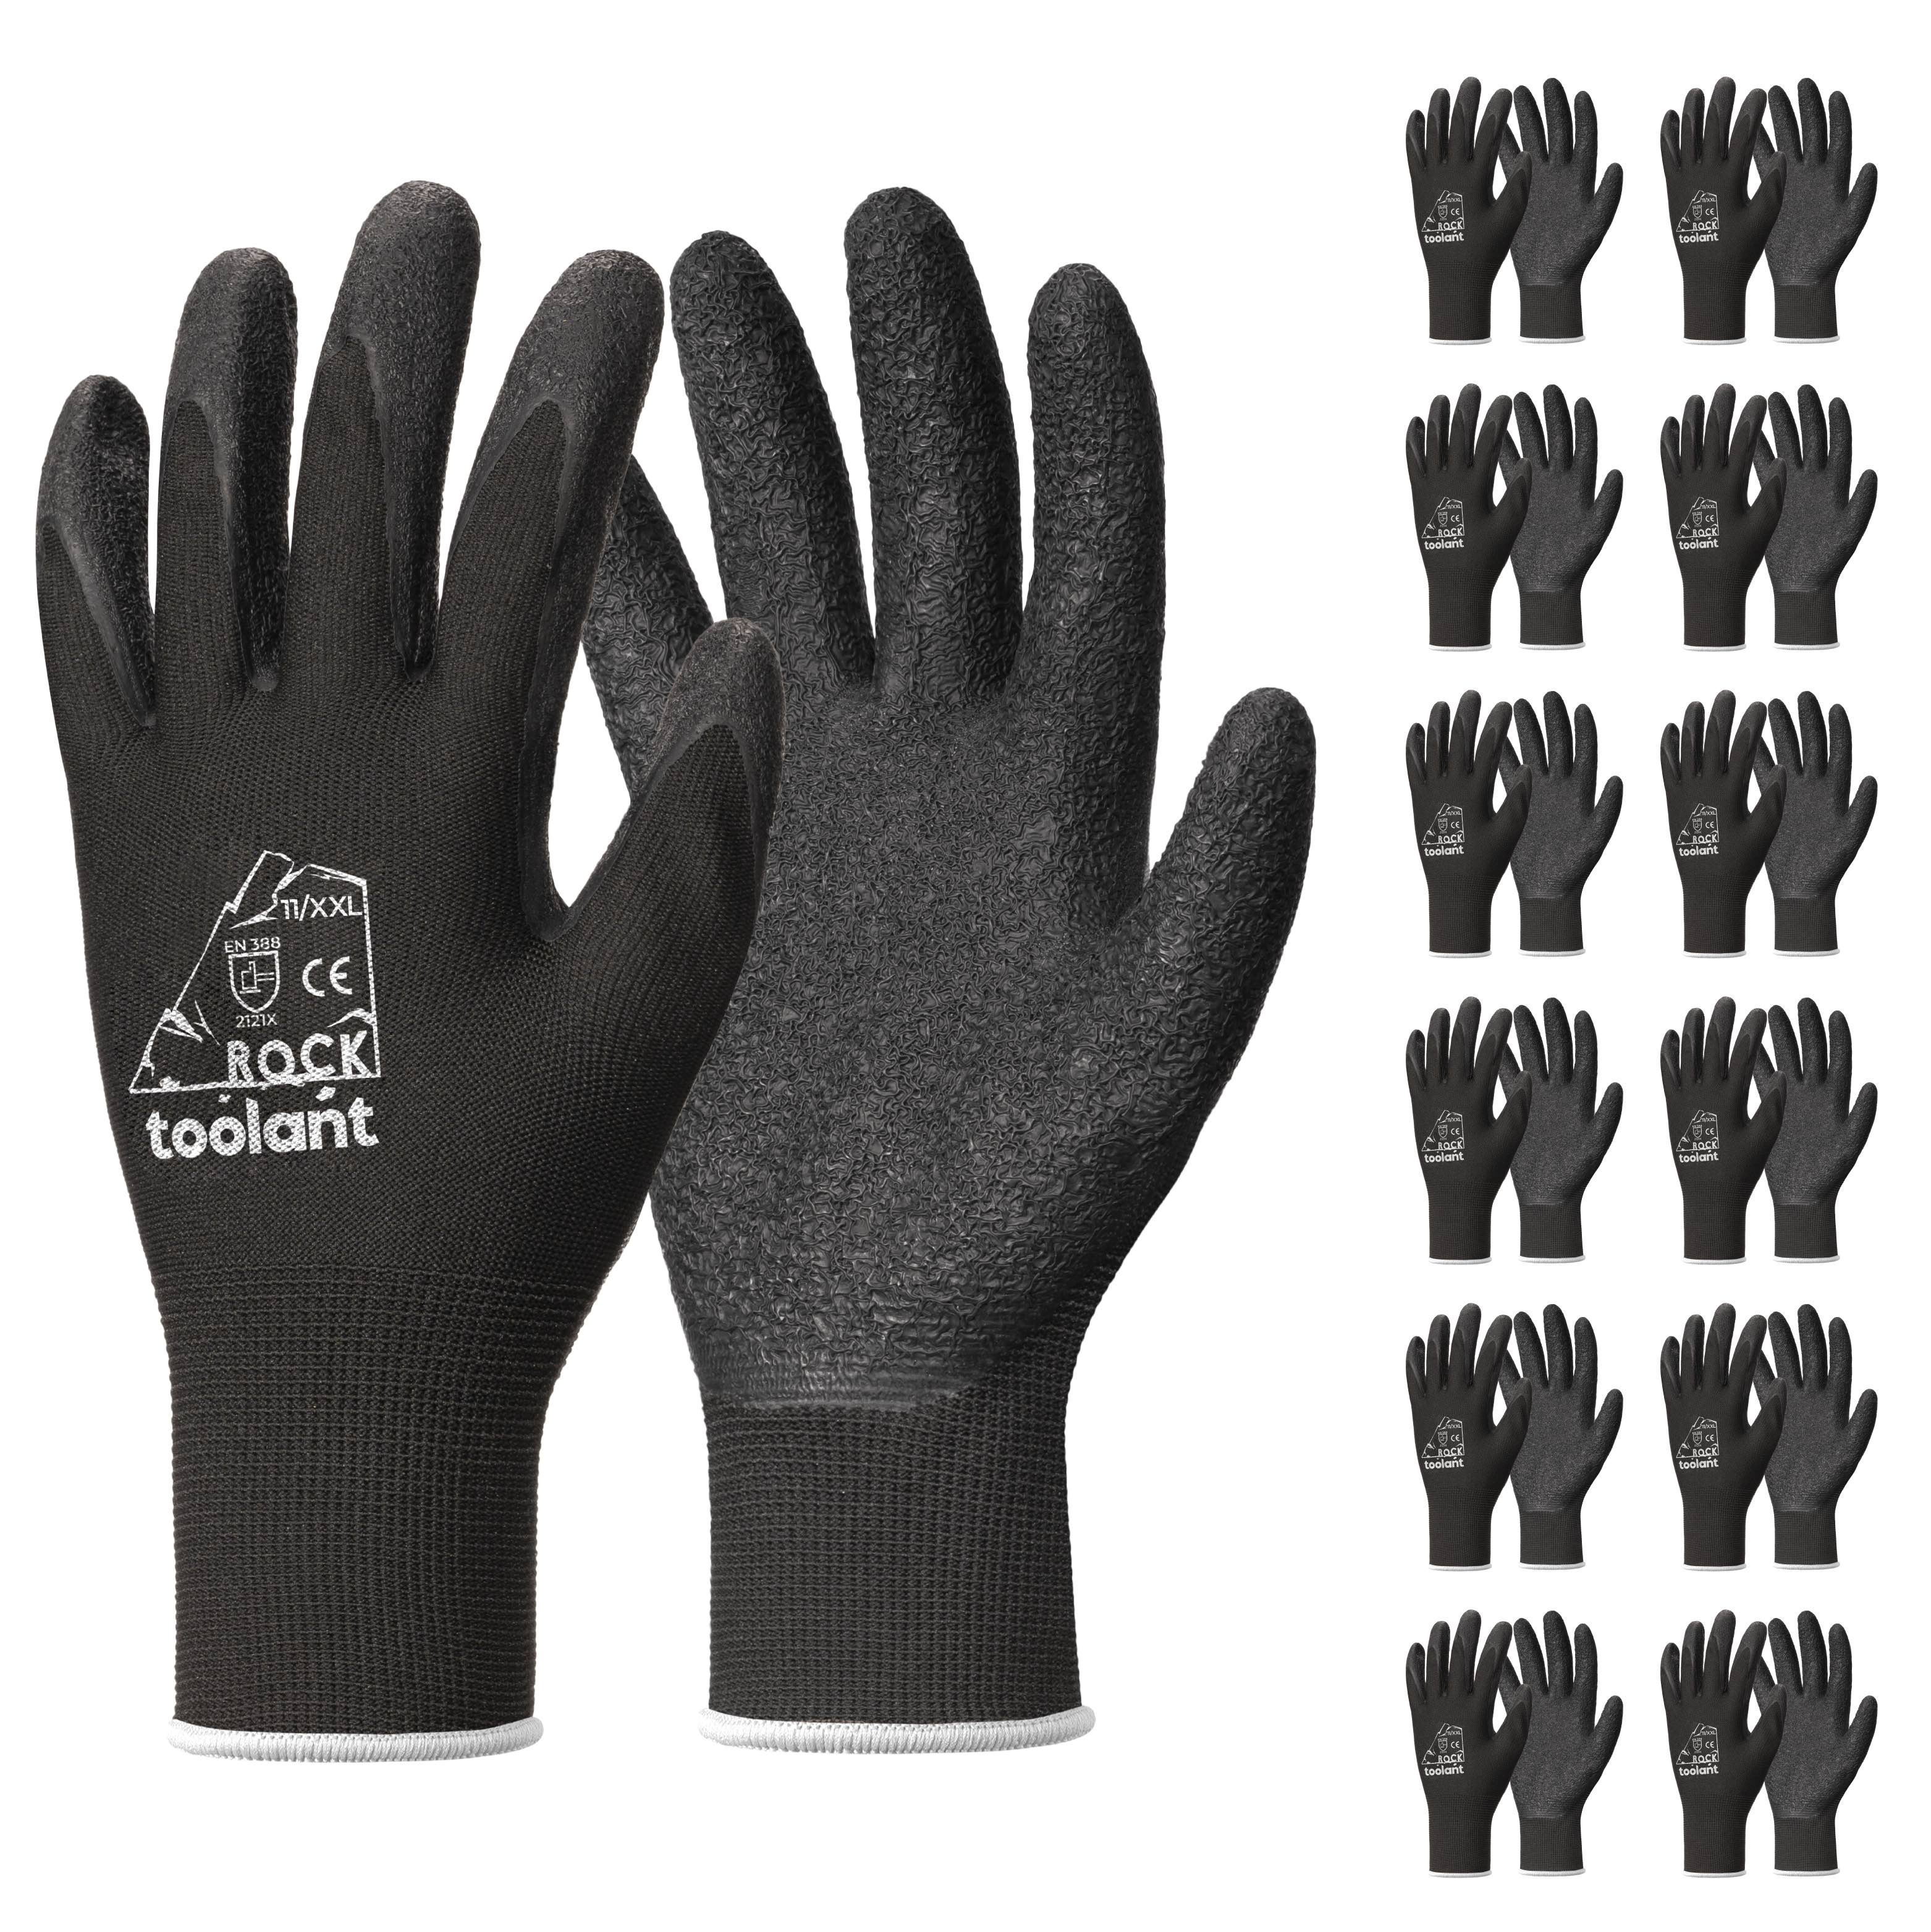 12 Pairs Crinkle Latex Rubber Hand Coated Safety Work Gloves for Men Women  General Multi Use Construction Warehouse Gardening Assembly Landscaping